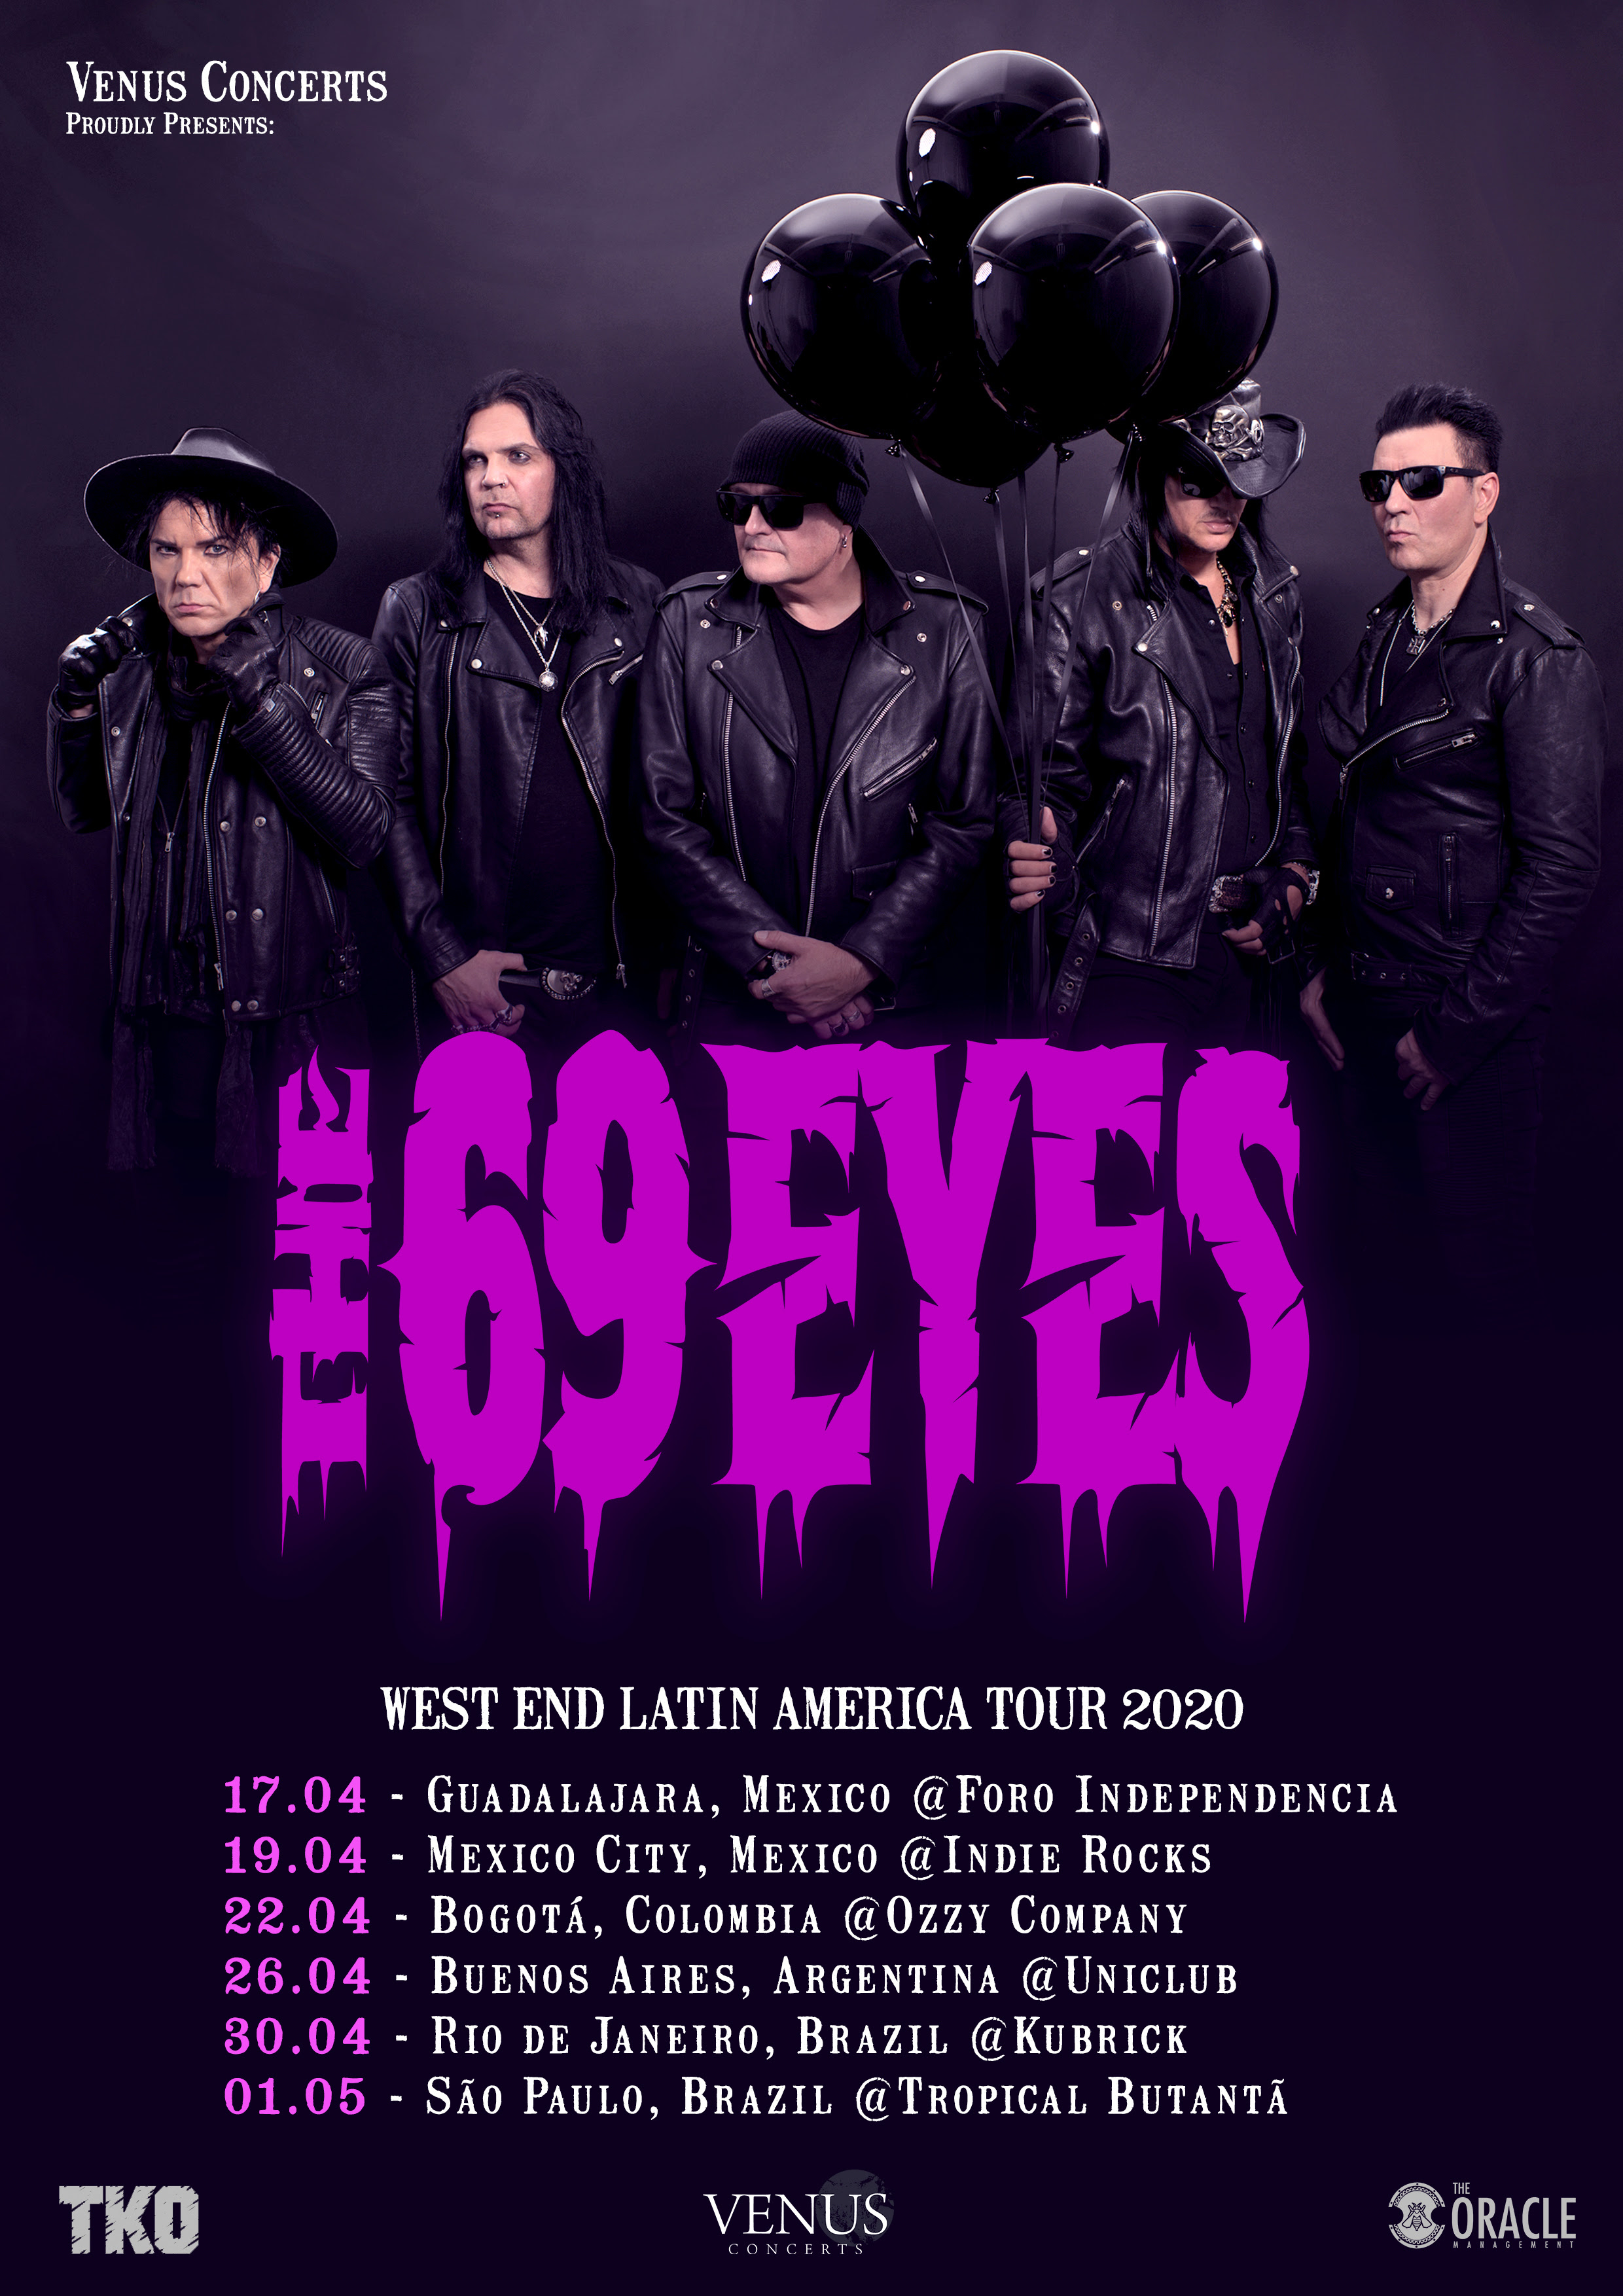 THE 69 EYES Release New Tour Trailer, Watch Here BPM